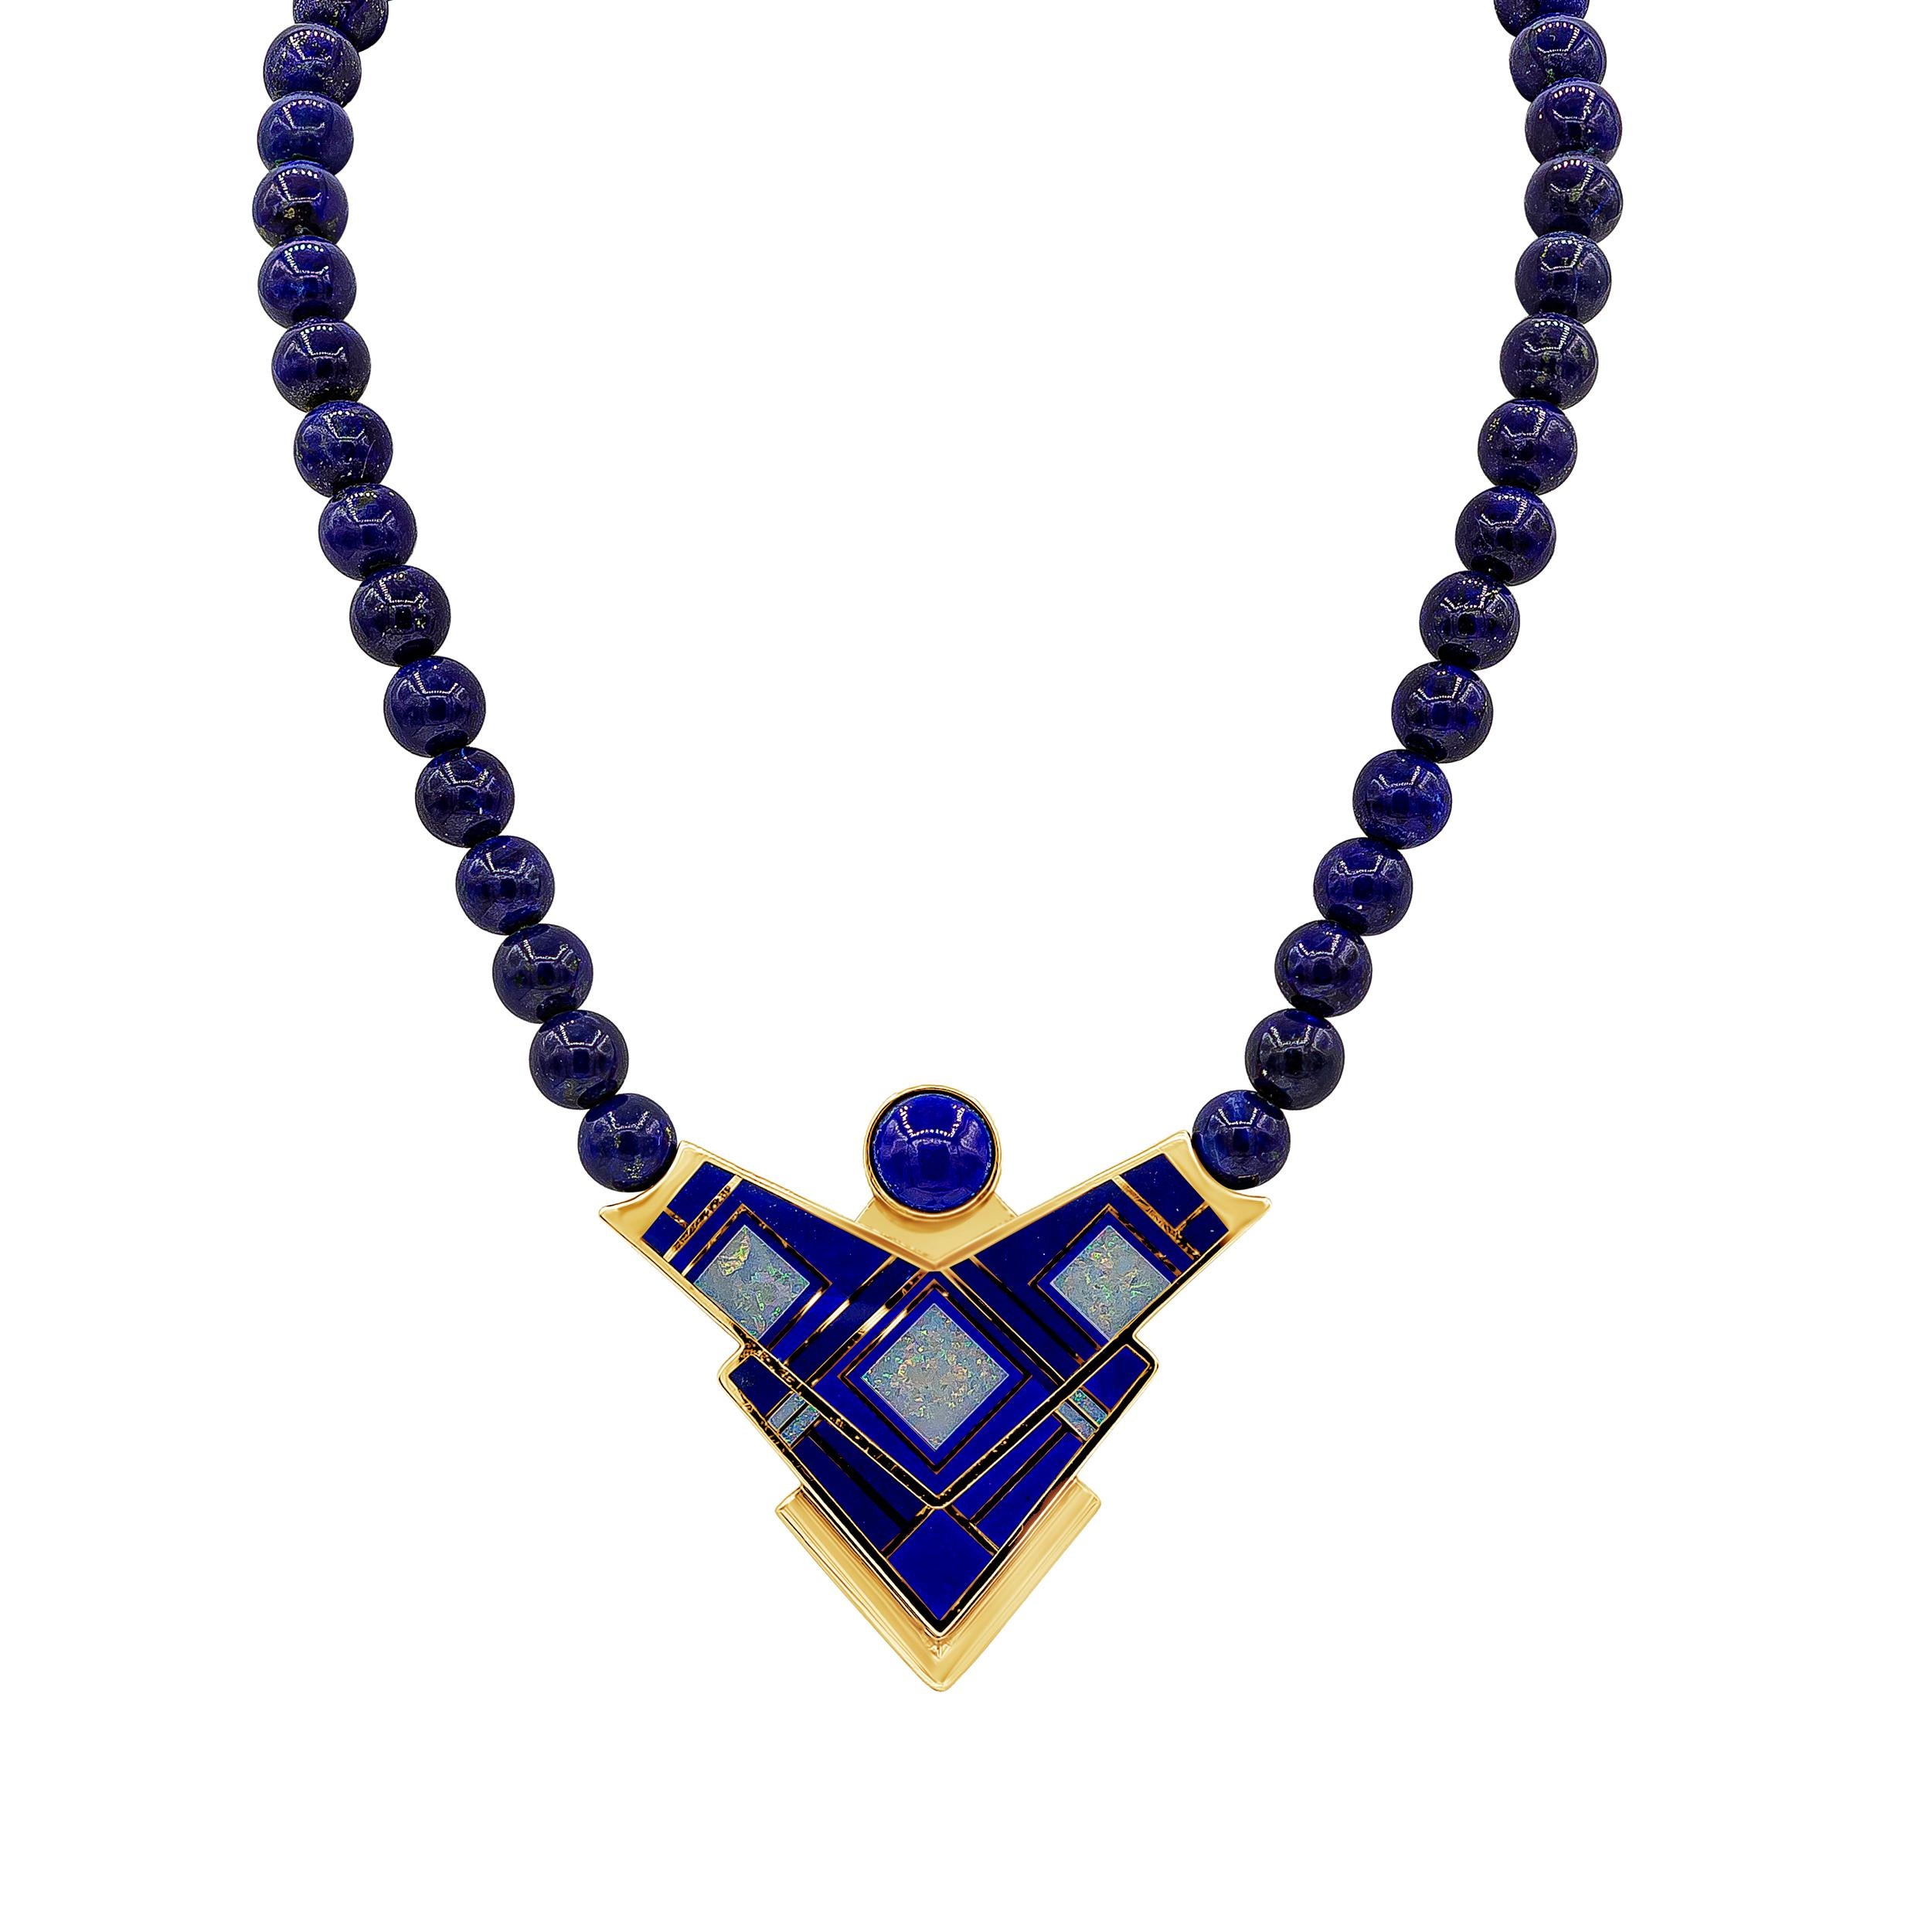 A unique necklace showcasing a geometric Native American design made of 14 karat yellow gold, accented by enamel and lapis lazuli. Pendant suspended on lapis lazuli beads. Made by Tracey Designs.

